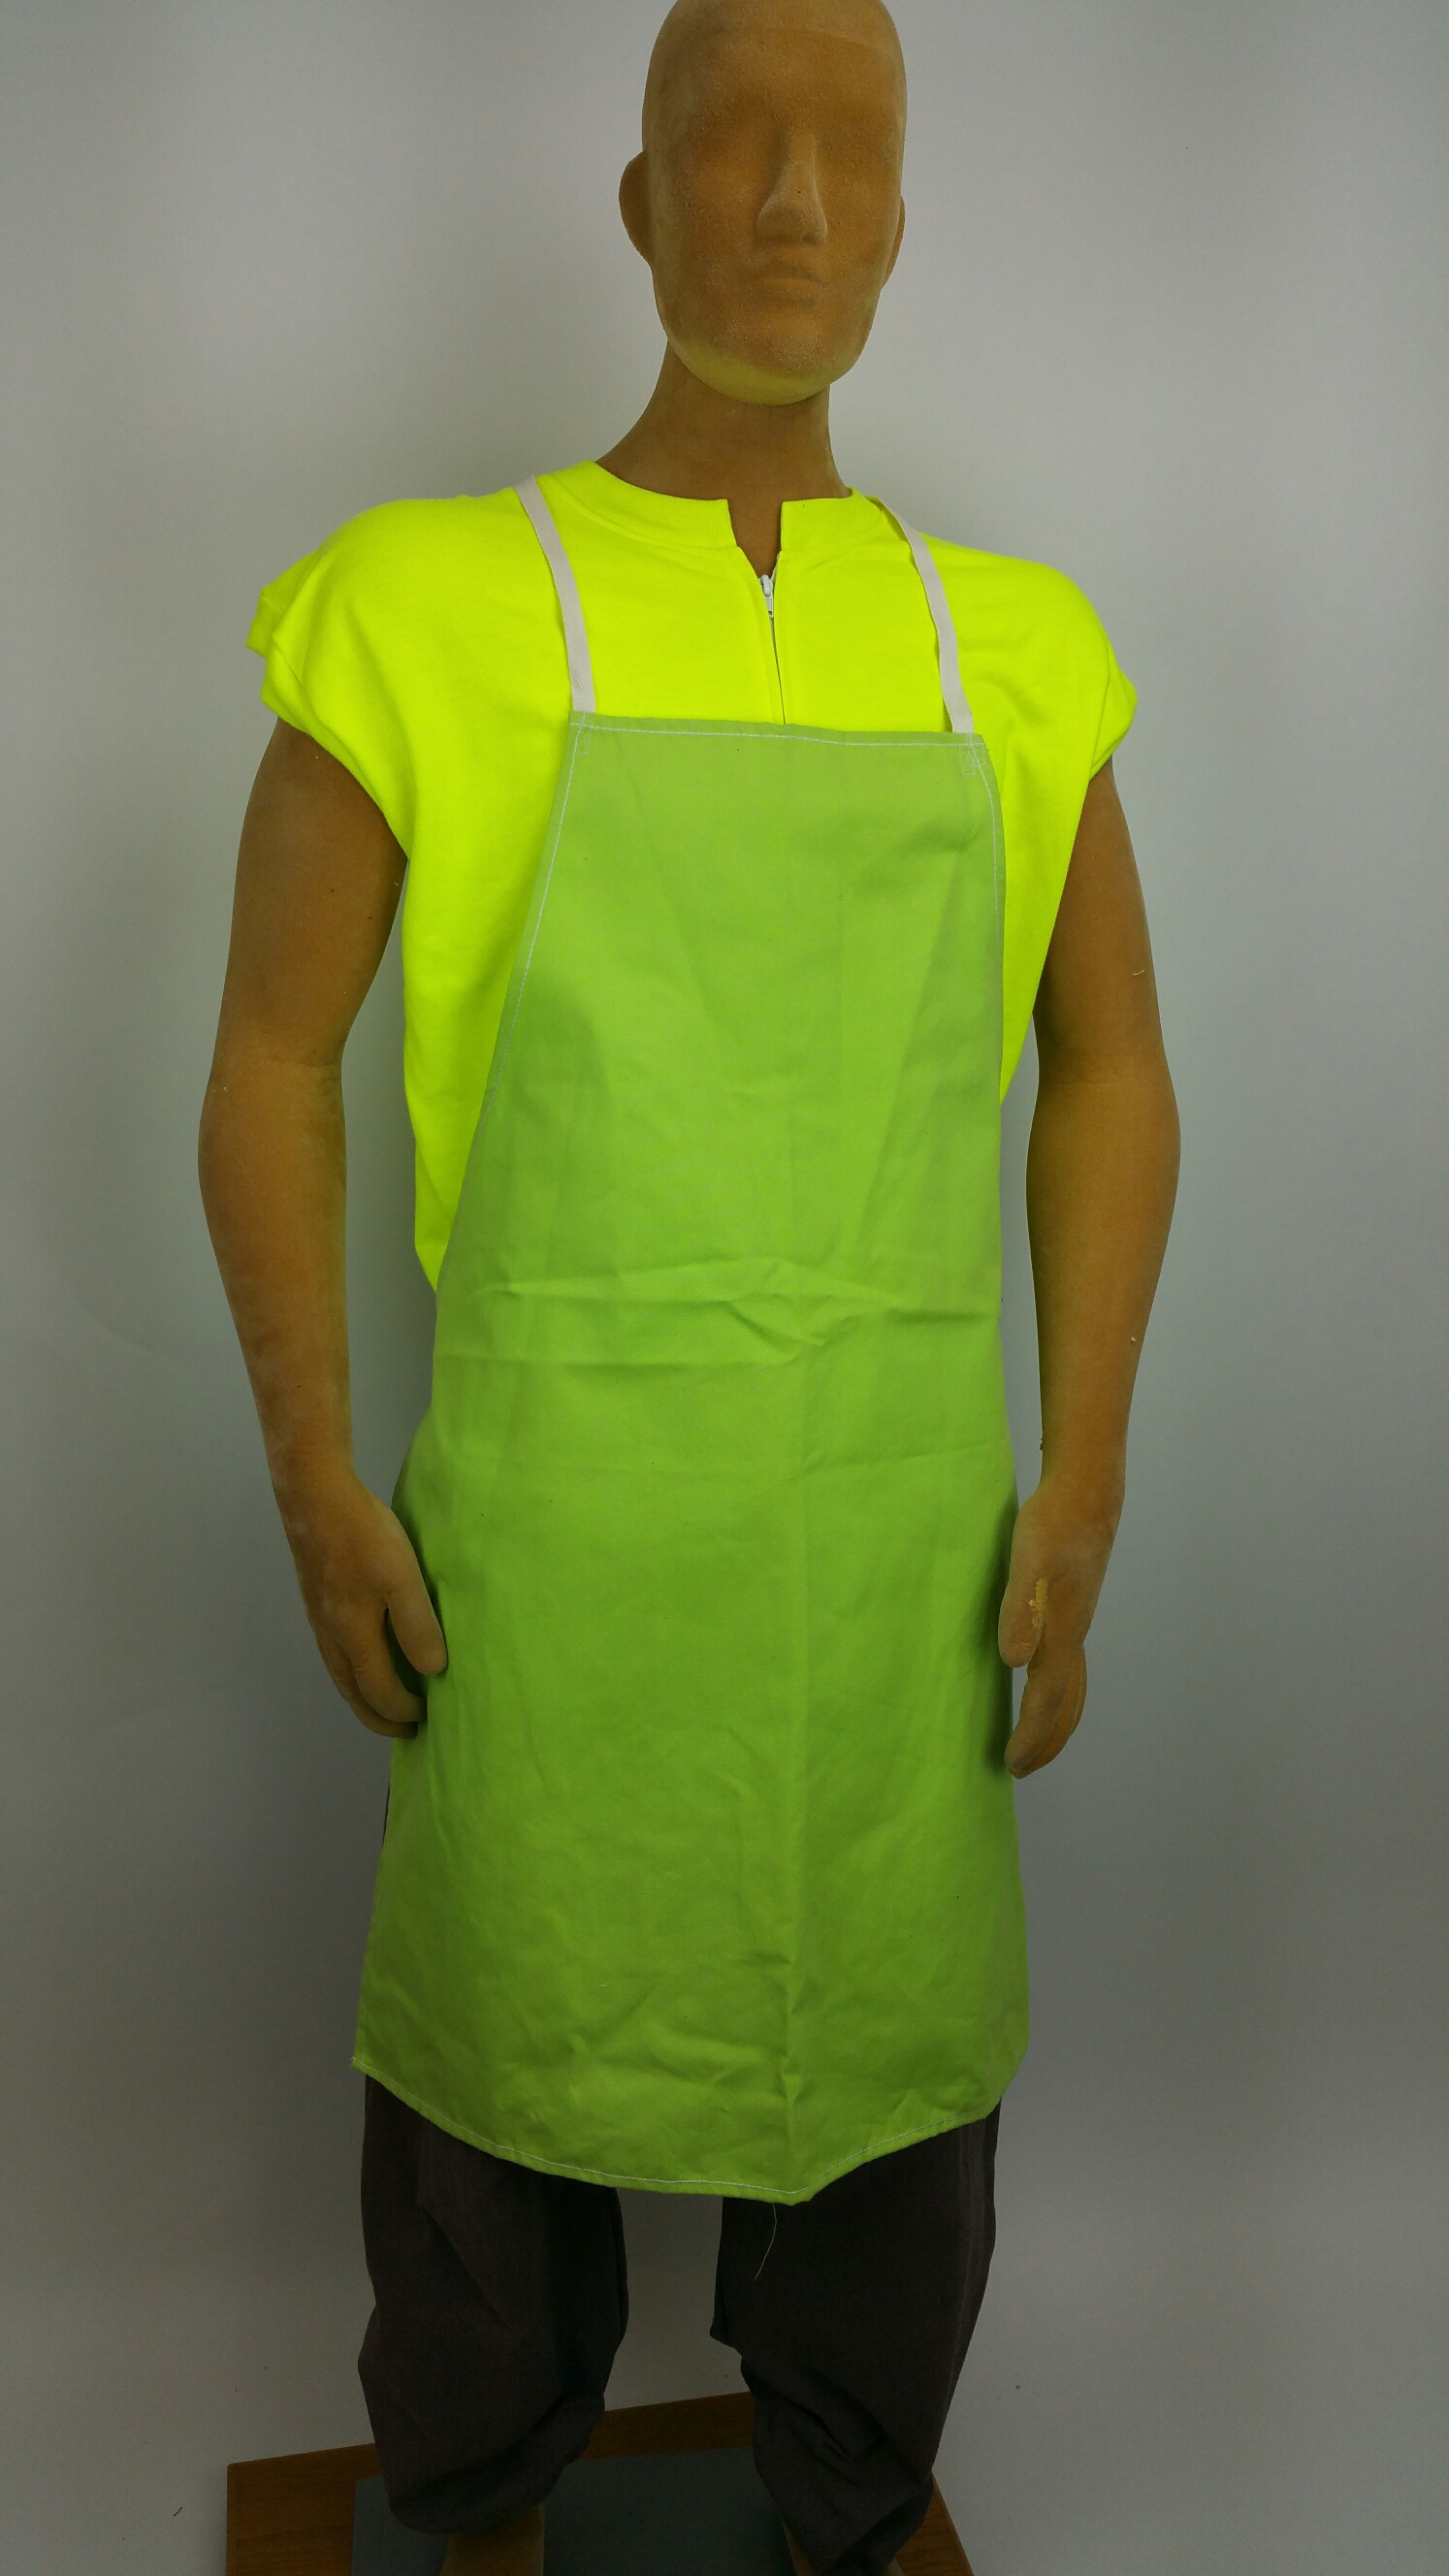 APRON BARRWELD® FR LIME YELLOW CTN TWILL TAPE - Latex, Supported